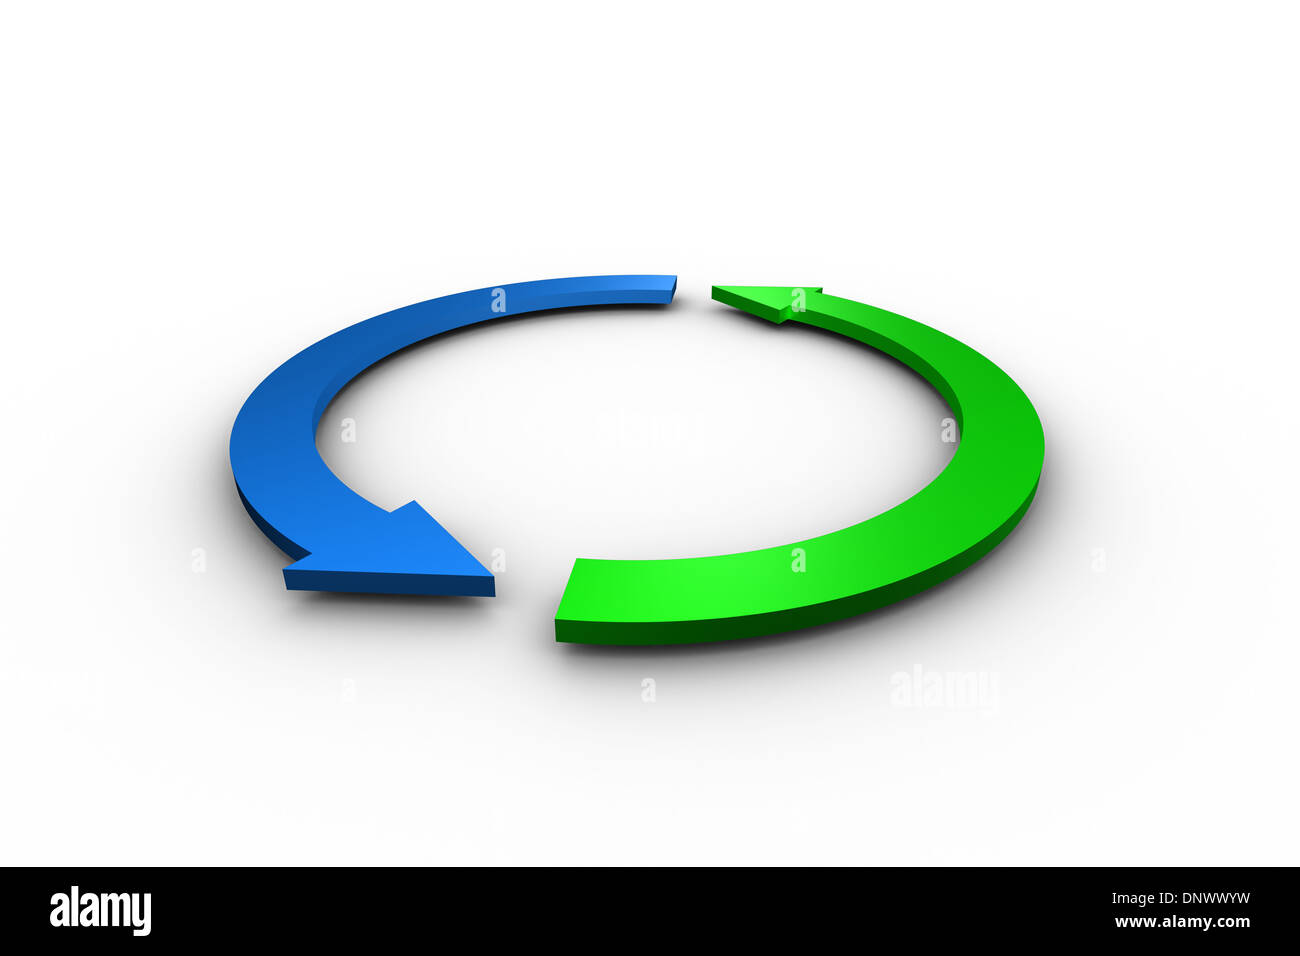 Green and blue arrow graphic Stock Photo